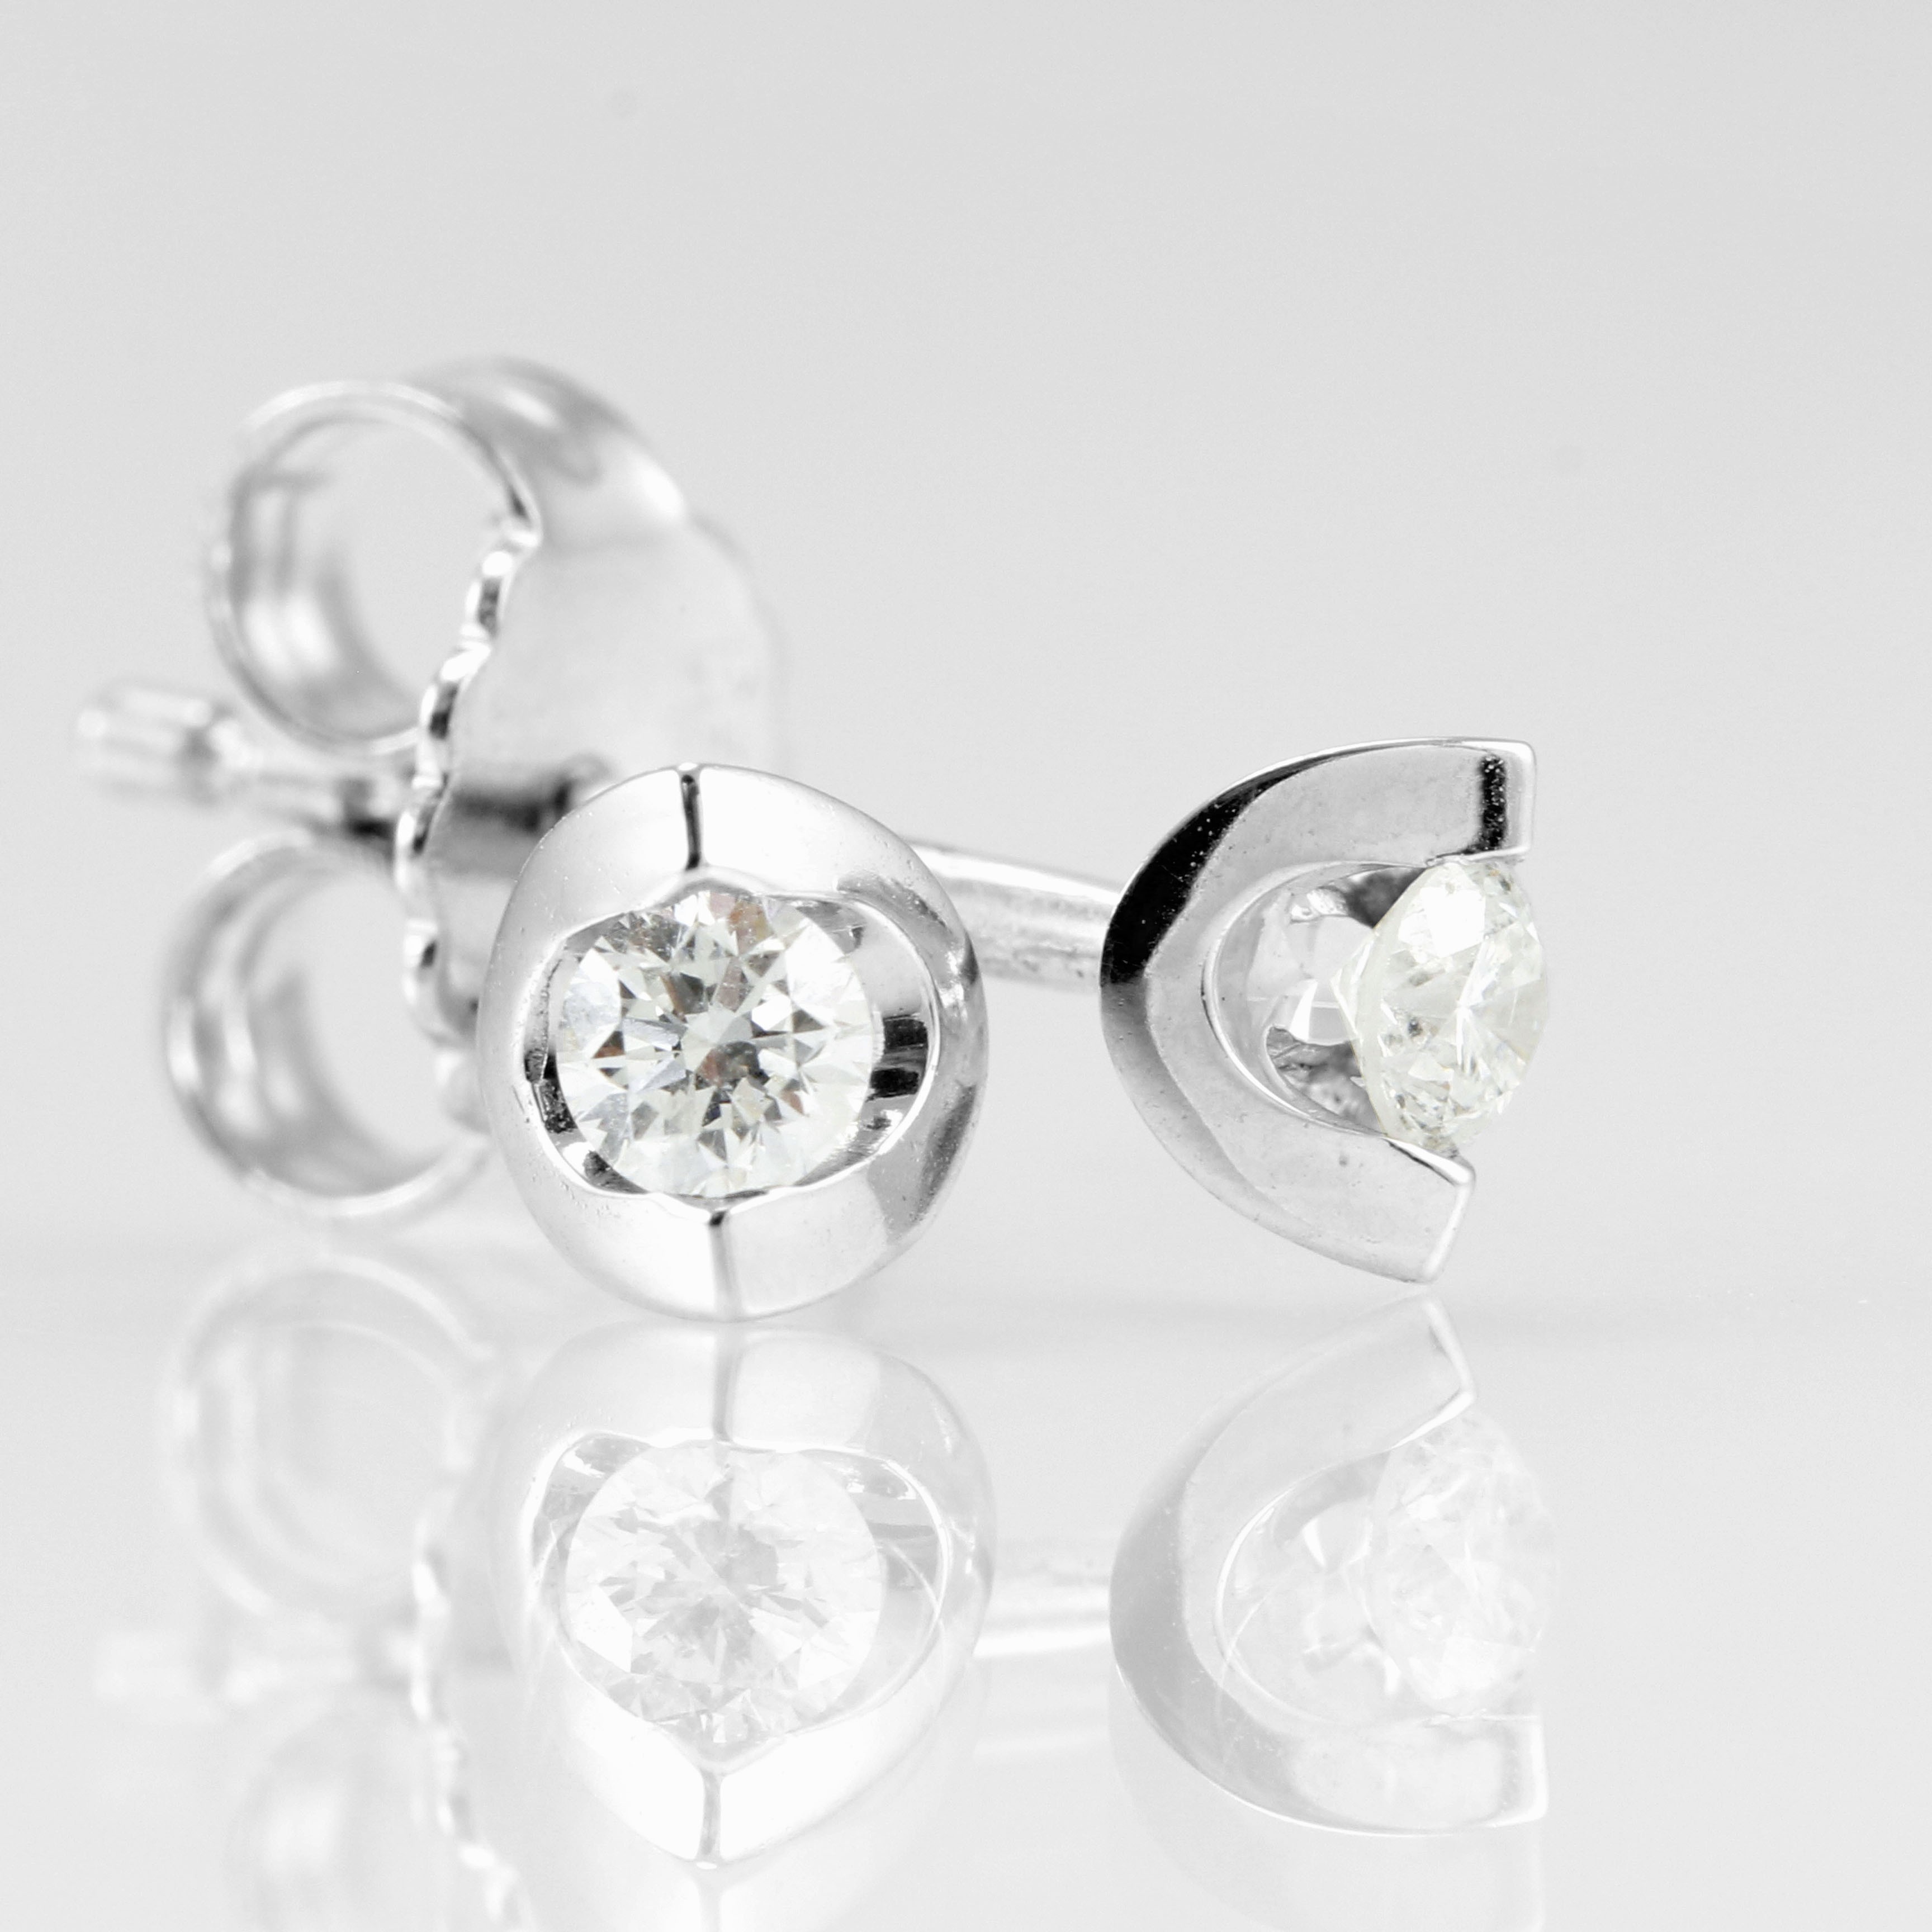 Just because it's Valentine's Day, doesn't mean everything has to be hearts and flowers. But you simply cannot go wrong with these Dazzling Diamond Earrings. With a 0.25ct Diamond total, crafted in smooth 18ct White Gold. Choose these Eclipse Diamond Earrings for your love this Valentine's Day. £450 